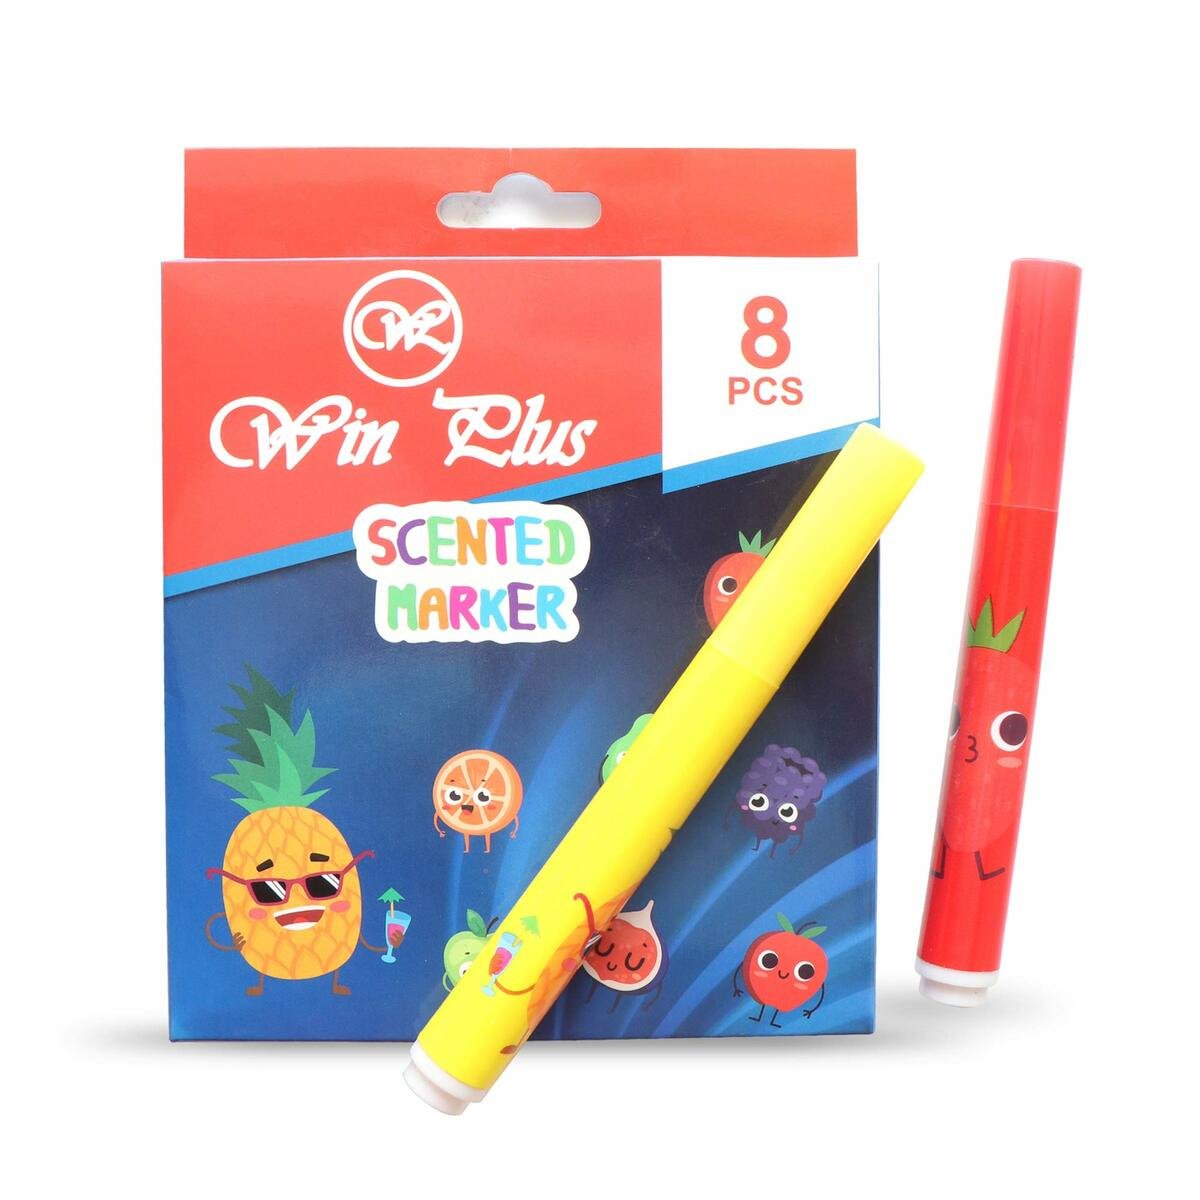 Win Plus Scented Marker NP2005 8's